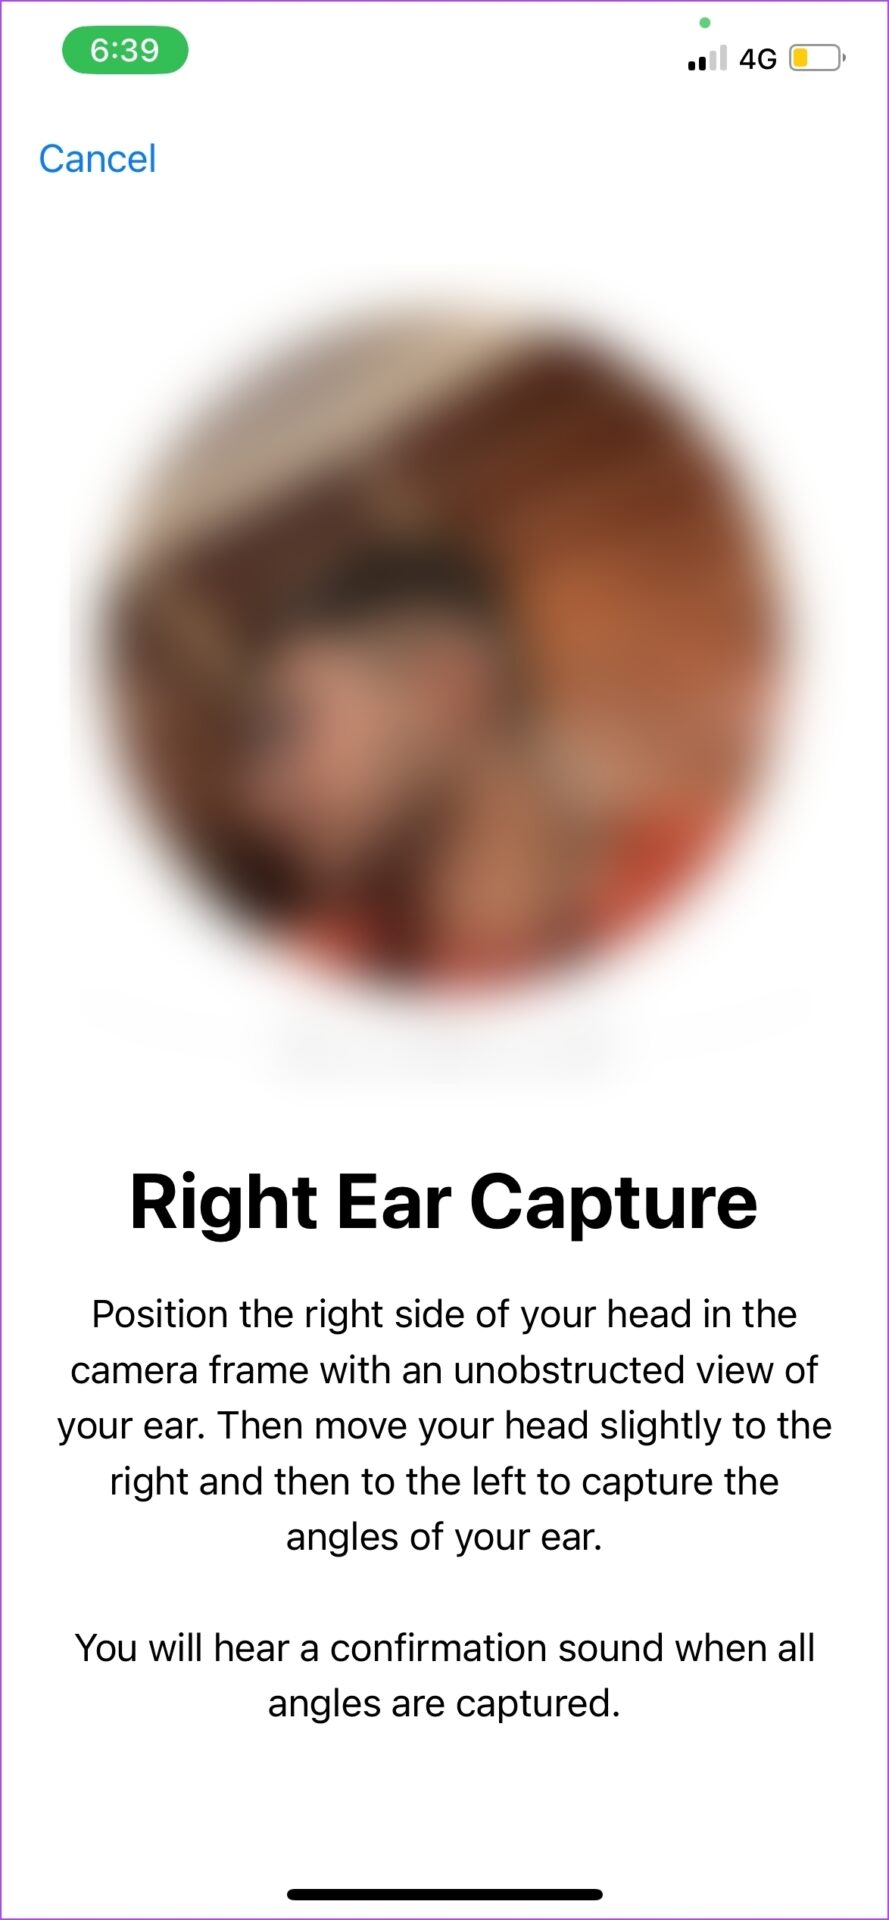 Right Ear Capture